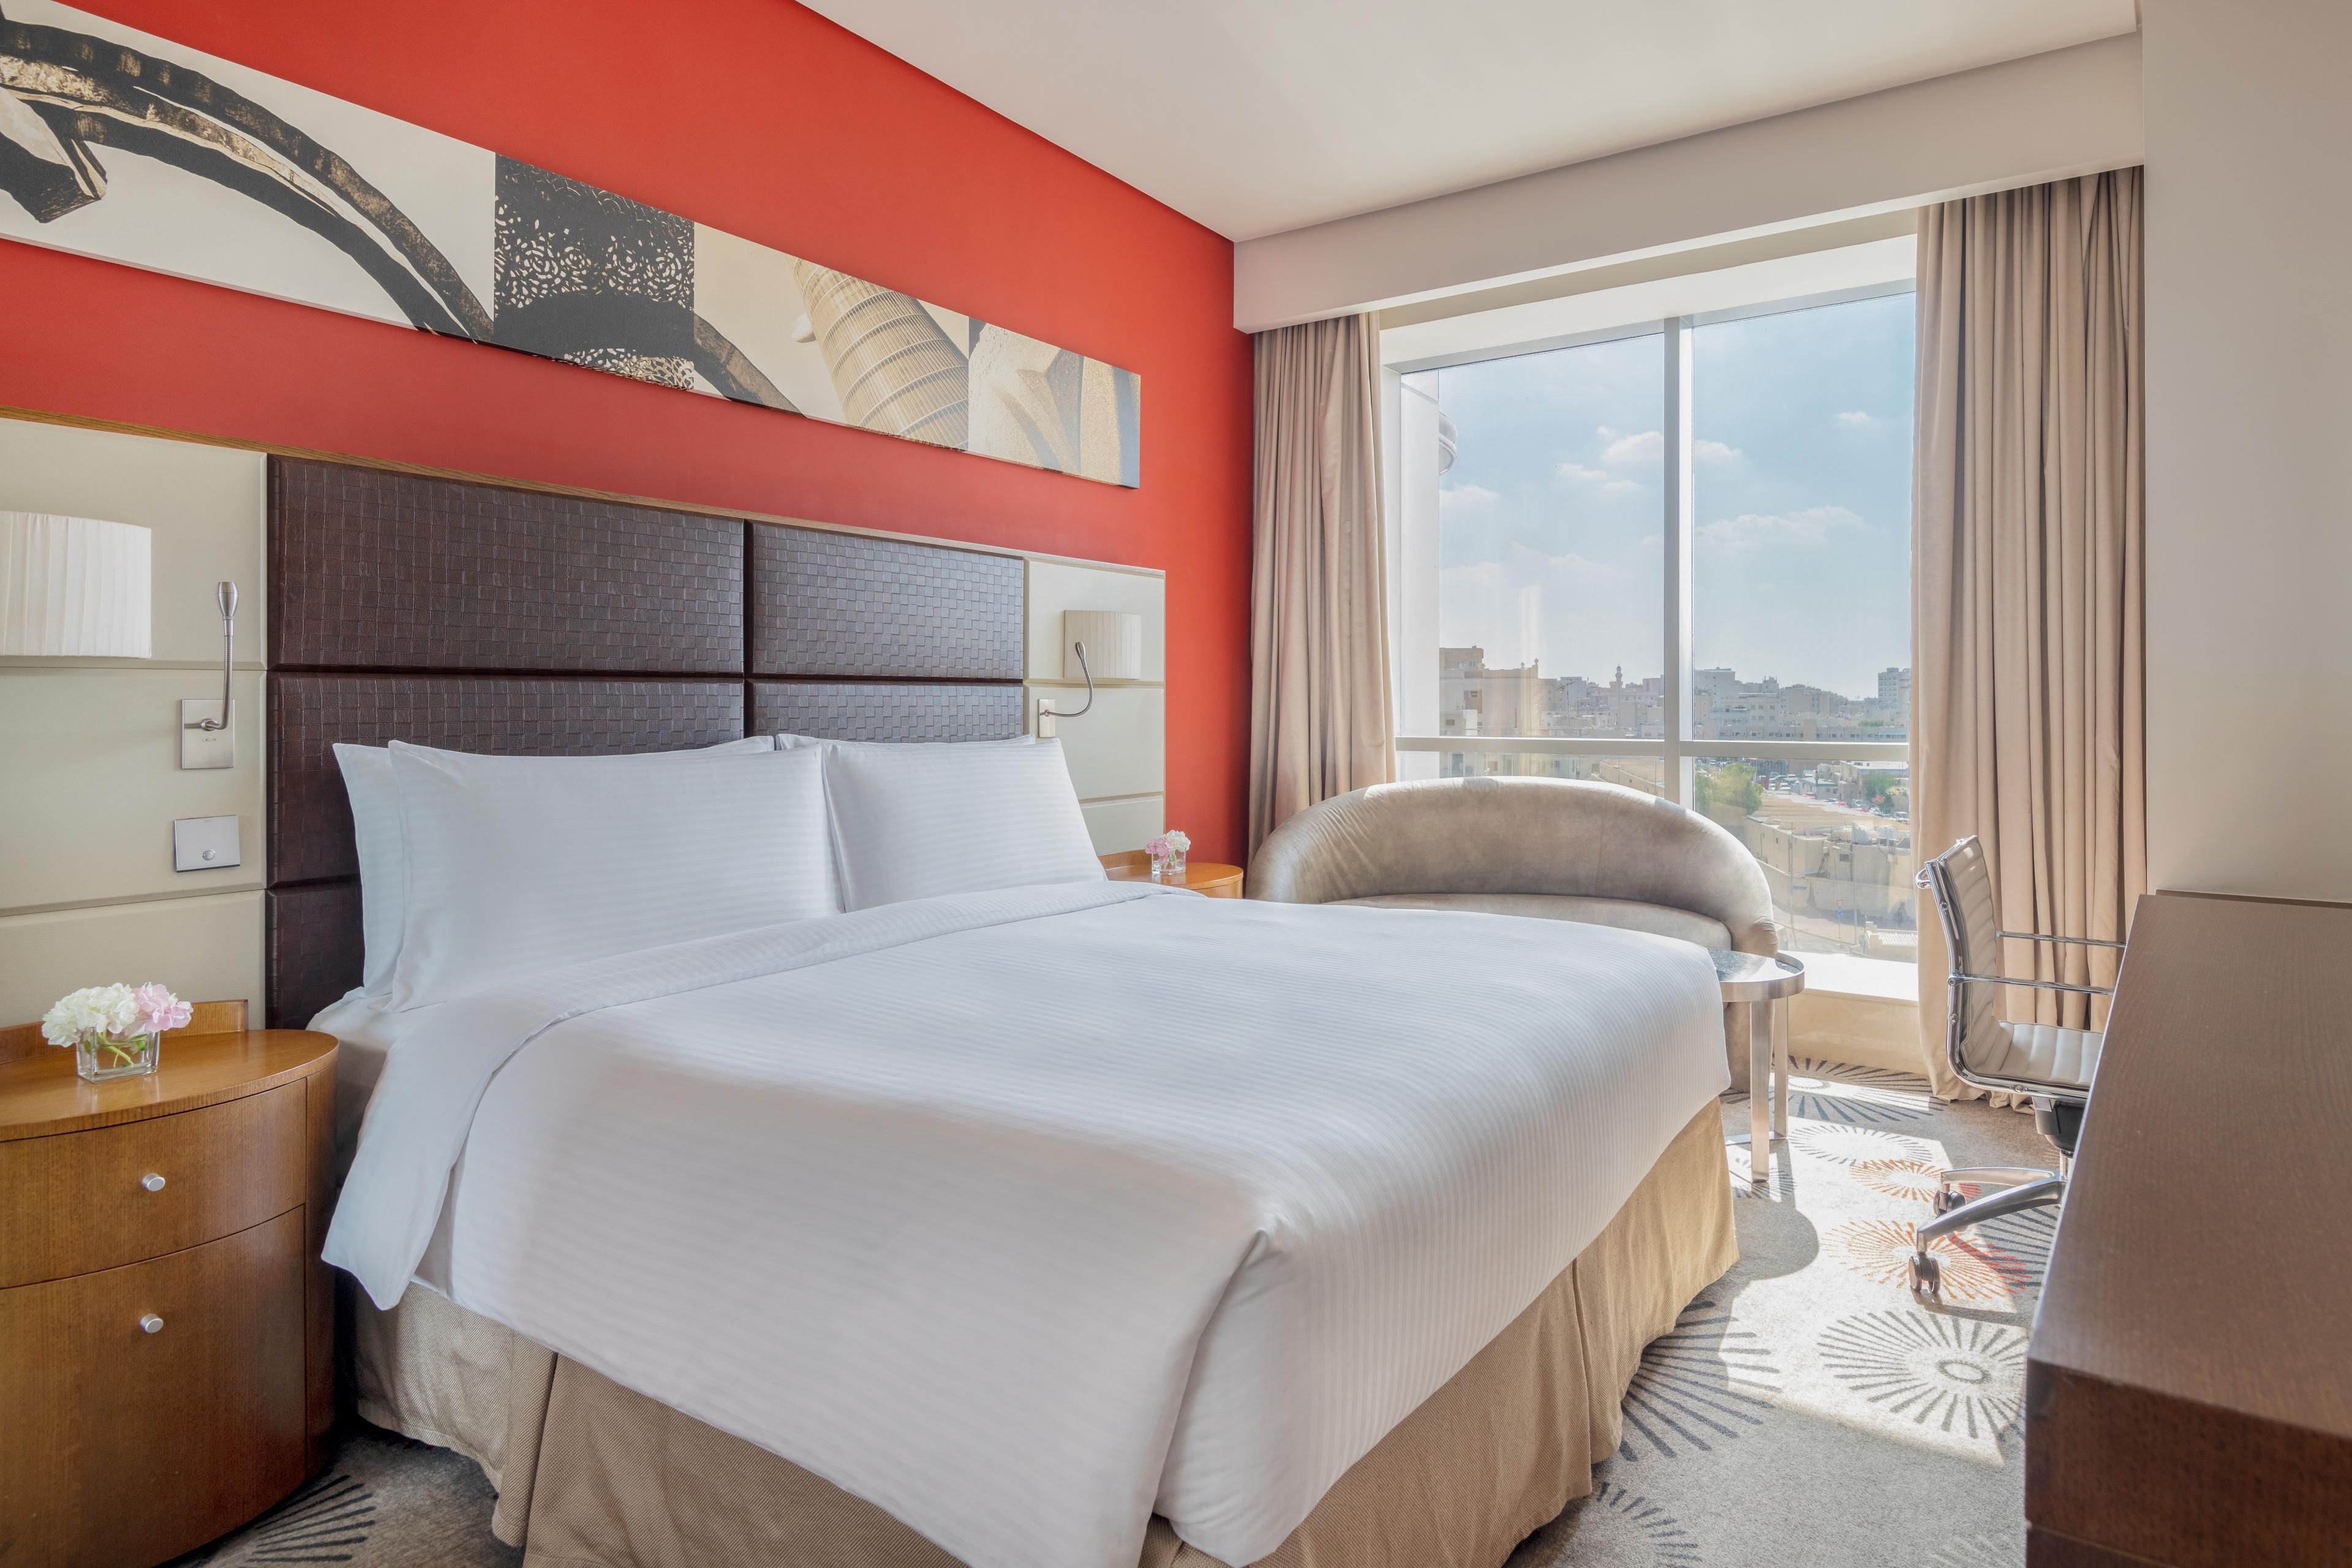 Wake up in comfort in our 1-bedroom apartment